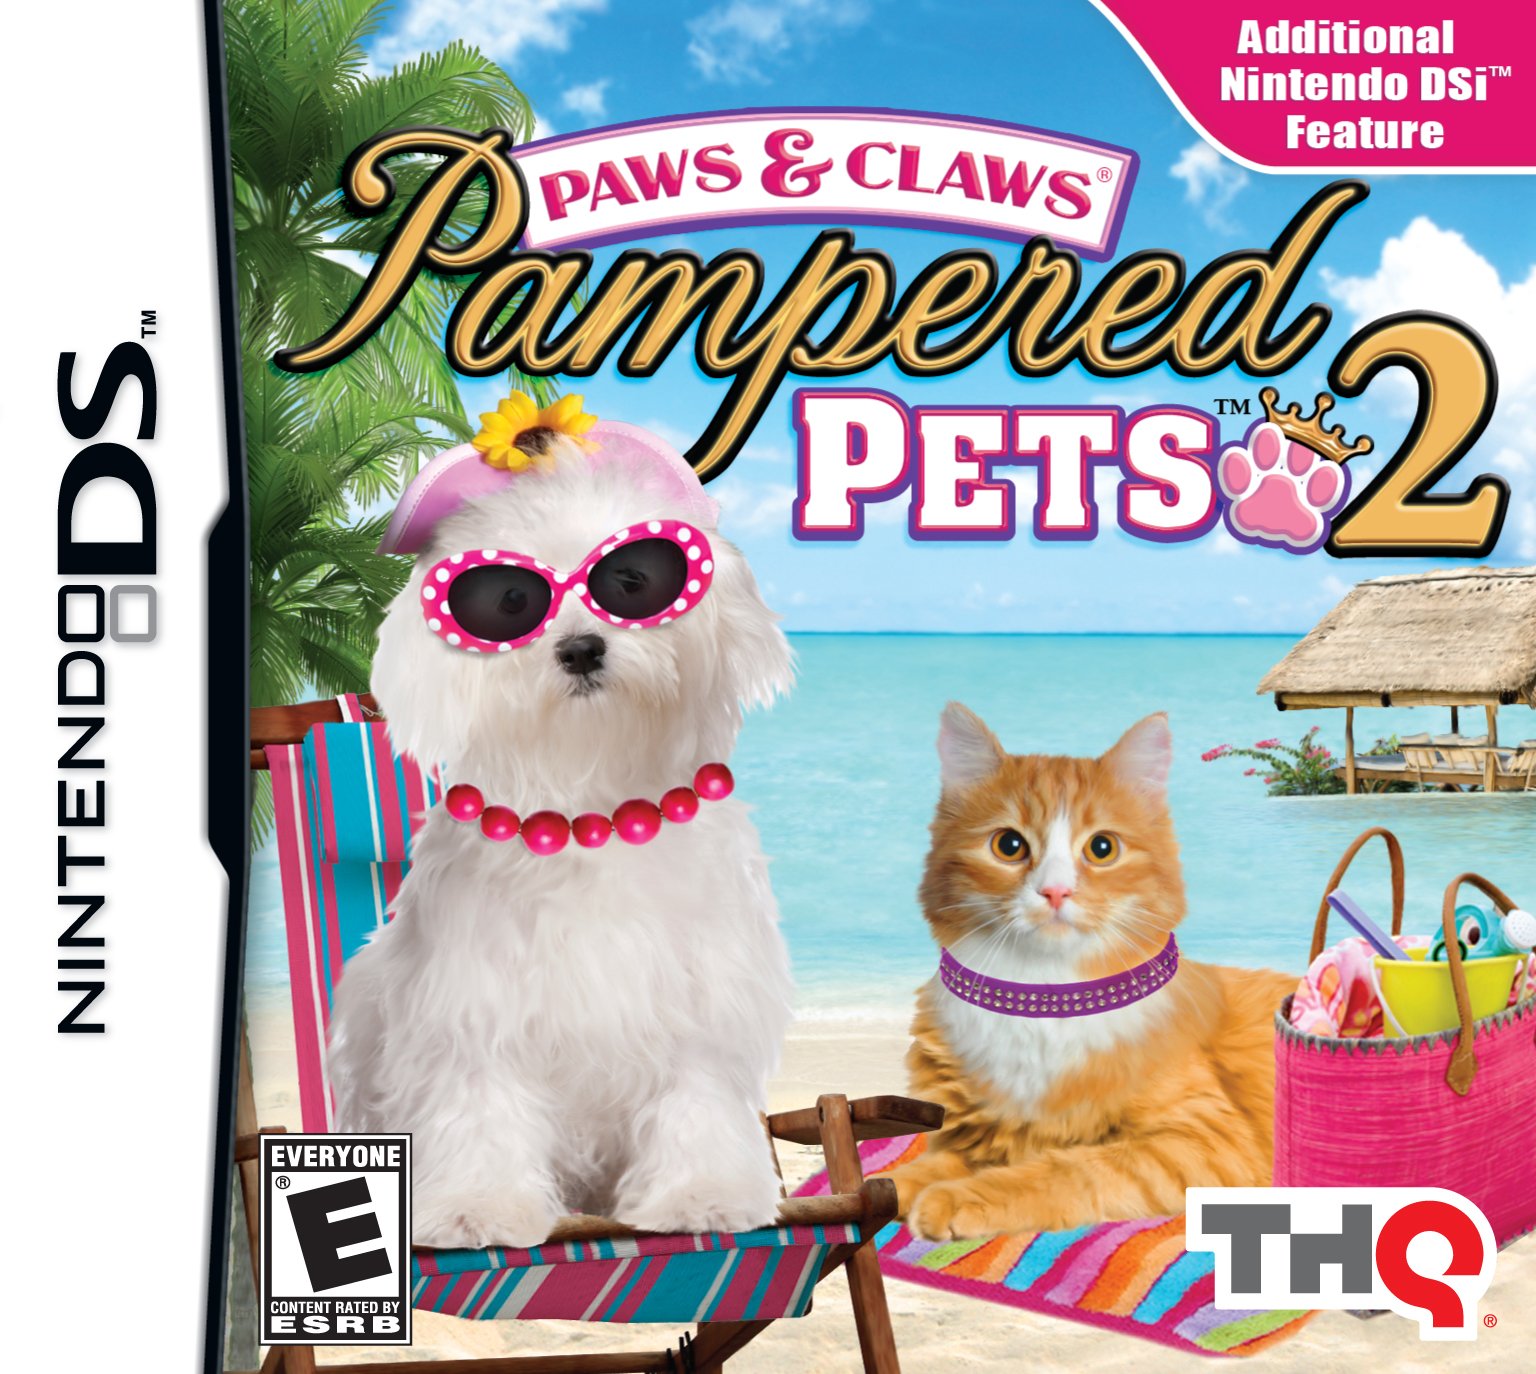 Paws and Claws Pampered Pets 2 - Nintendo DS